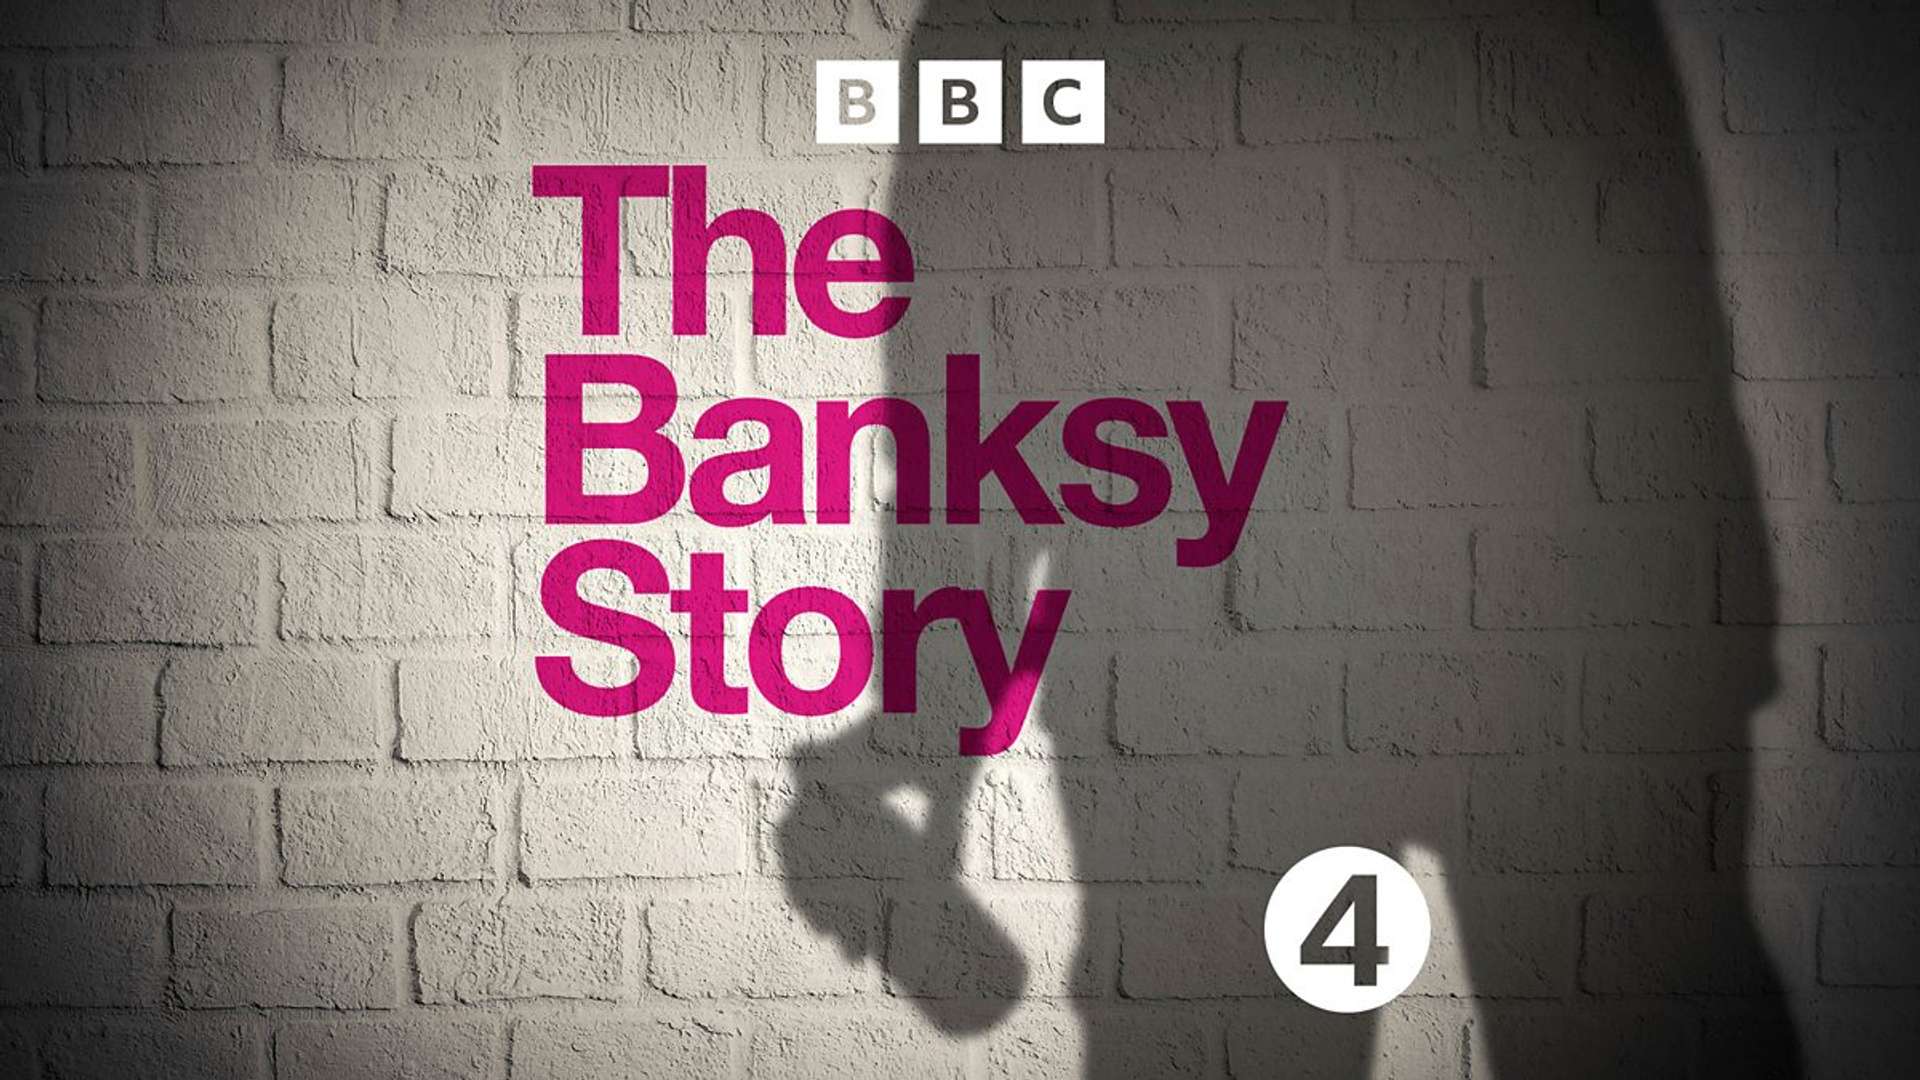 An advertorial image for BBC Radio 4's The Banksy Story podcast (2023) showing a shadow figure holding a spray paint can against a white brick wall with the name of the podcast typed in pink.